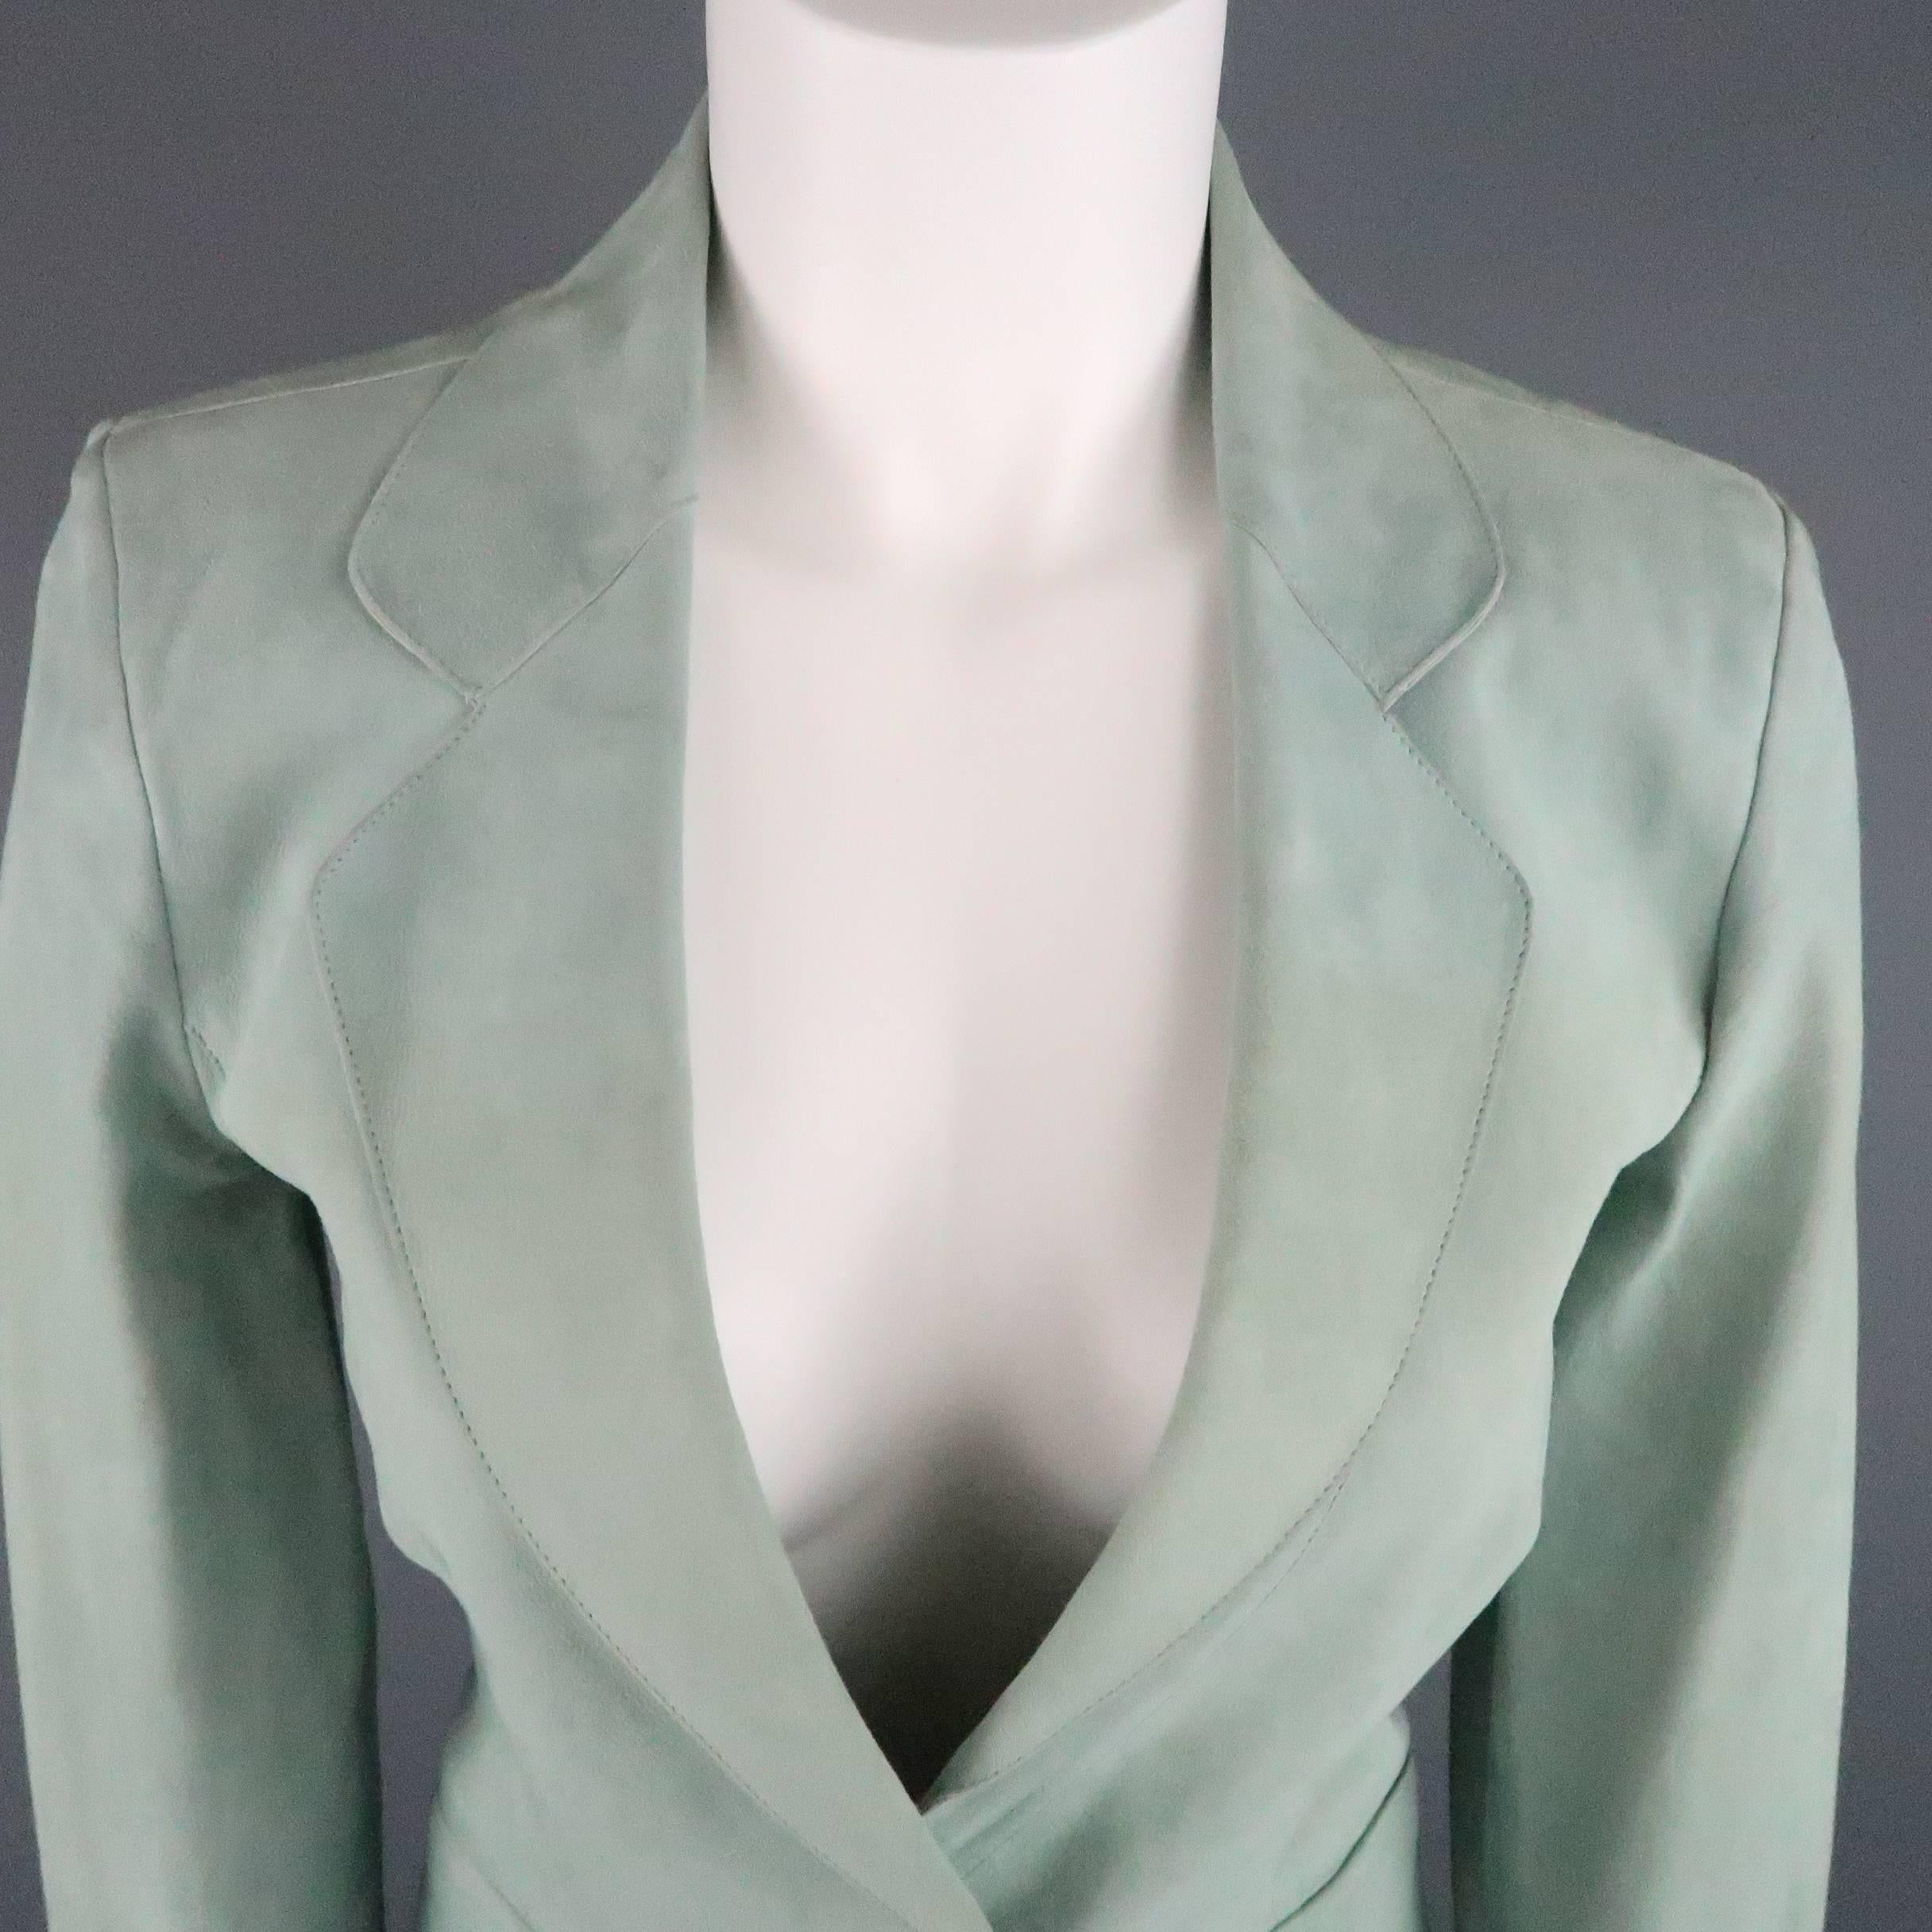 GIORGIO ARMANI cropped sport coat comes in soft cool green nubuck leather and features a round notch lapel, single button closure, and single vented back. Minor fading throughout. As-Is. Made in  Italy.
 
Good Pre-Owned Condition.
Marked: IT 42
